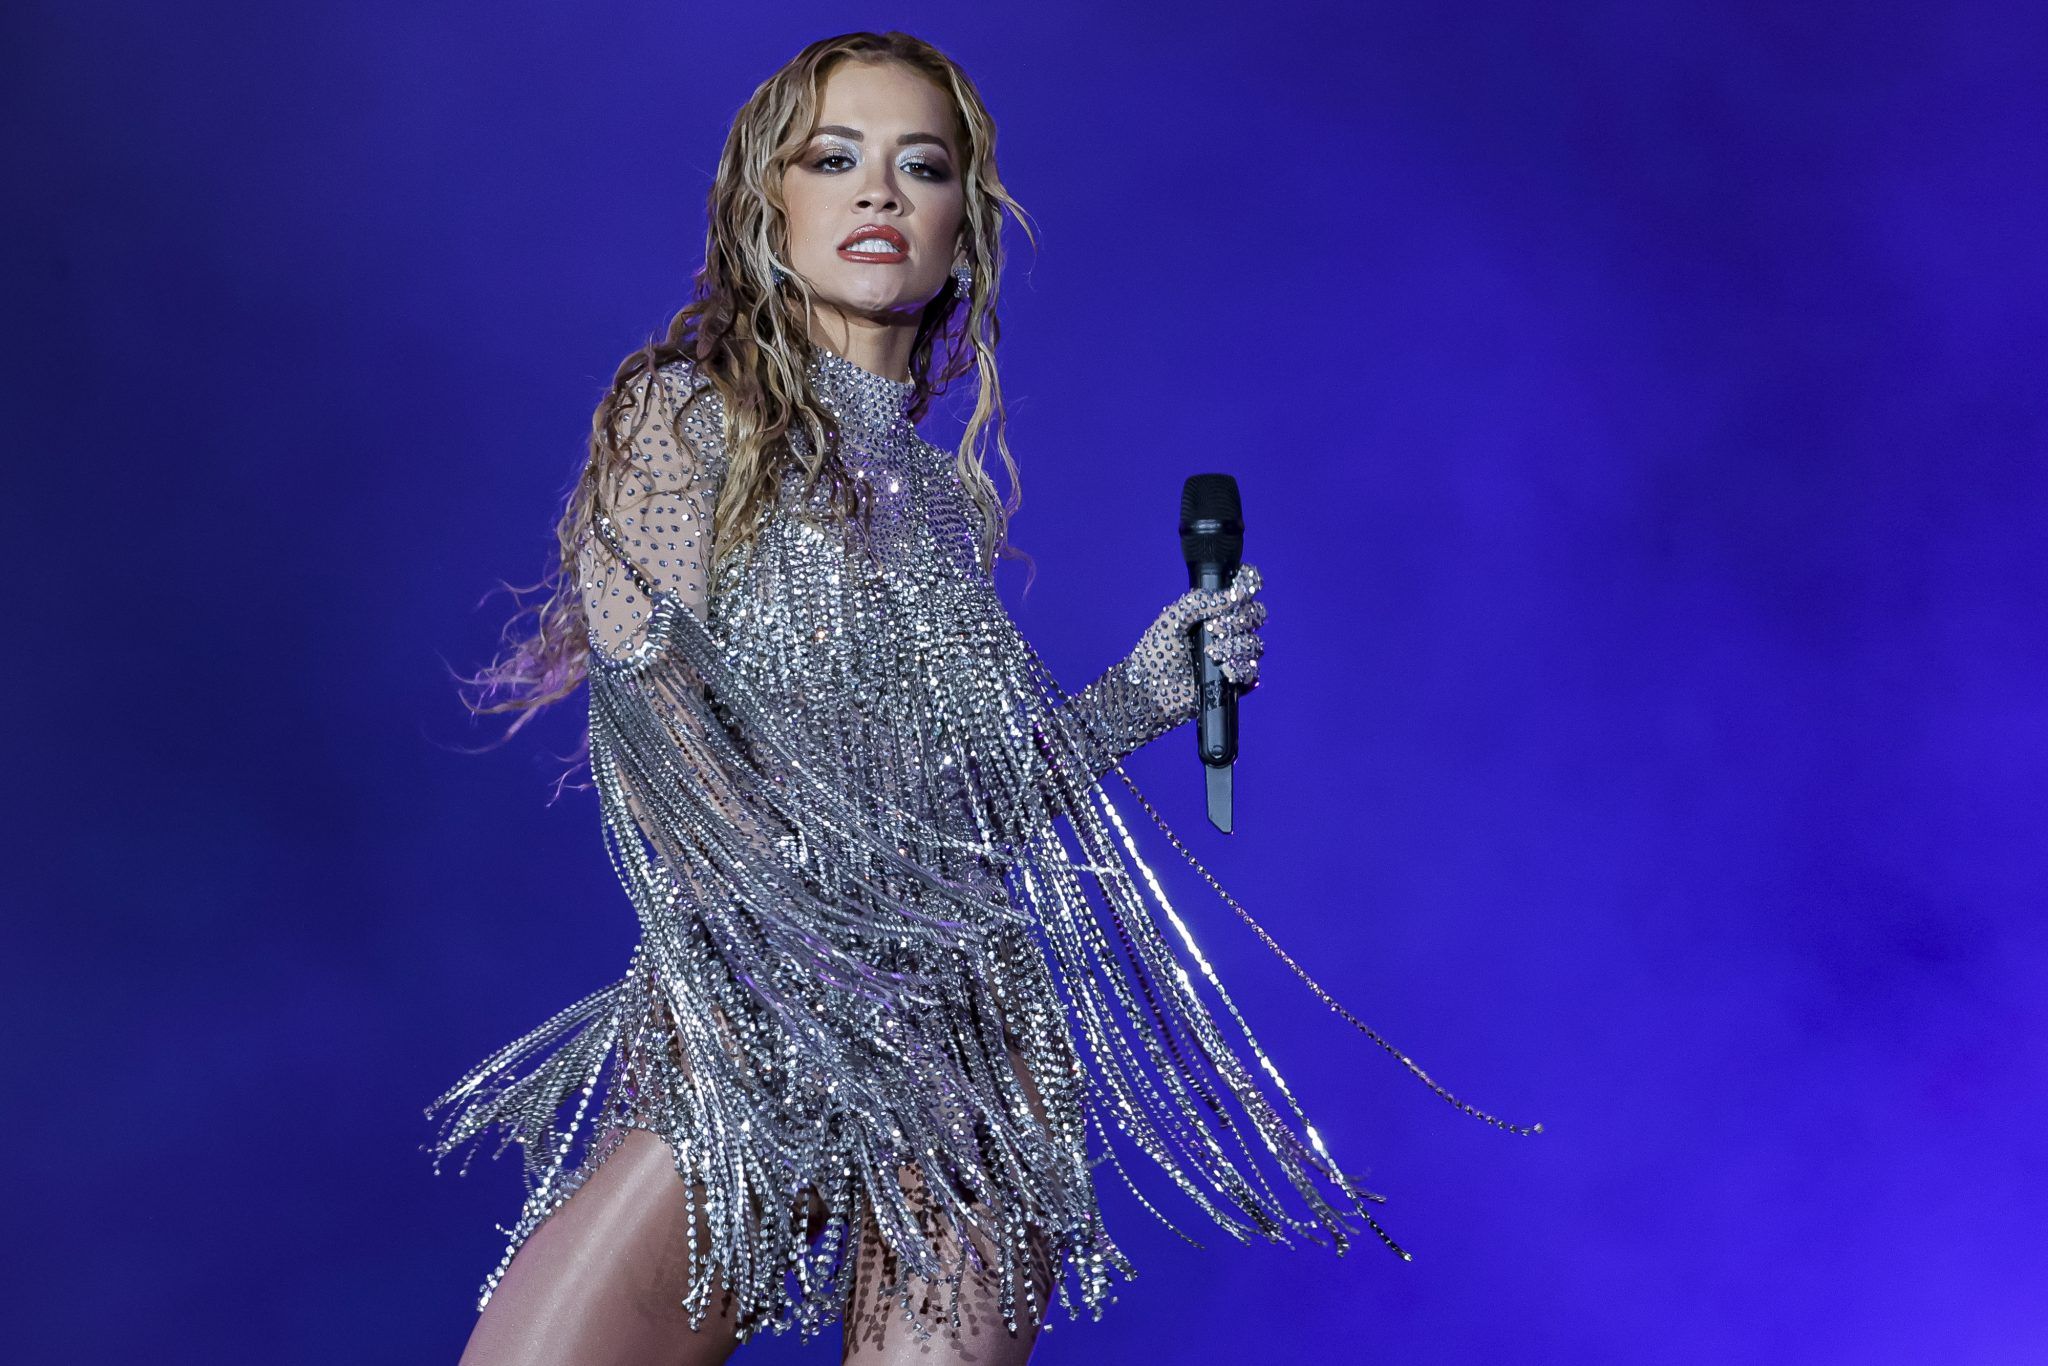 RIO DE JANEIRO, BRAZIL - SEPTEMBER 11: Rita Ora performs at the Sunset Stage during the Rock in Rio Festival at Cidade do Rock on September 11, 2022 in Rio de Janeiro, Brazil. The famous festival Rock in Rio returns after two years of cancellation due to COVID-19 pandemic. (Photo by Buda Mendes/Getty Images)